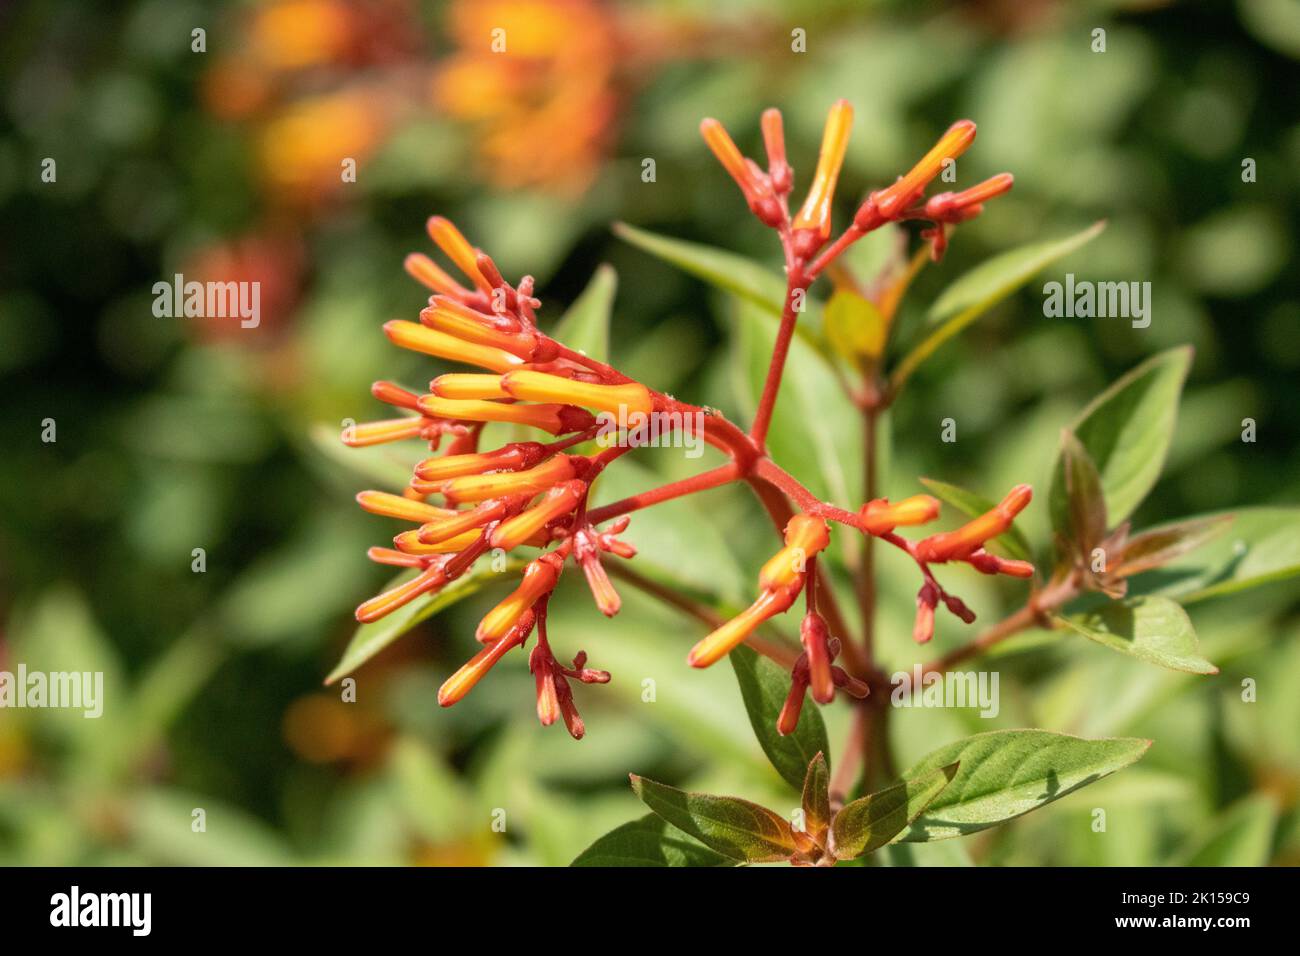 Close-up of a red and yellow Firebush plant Stock Photo